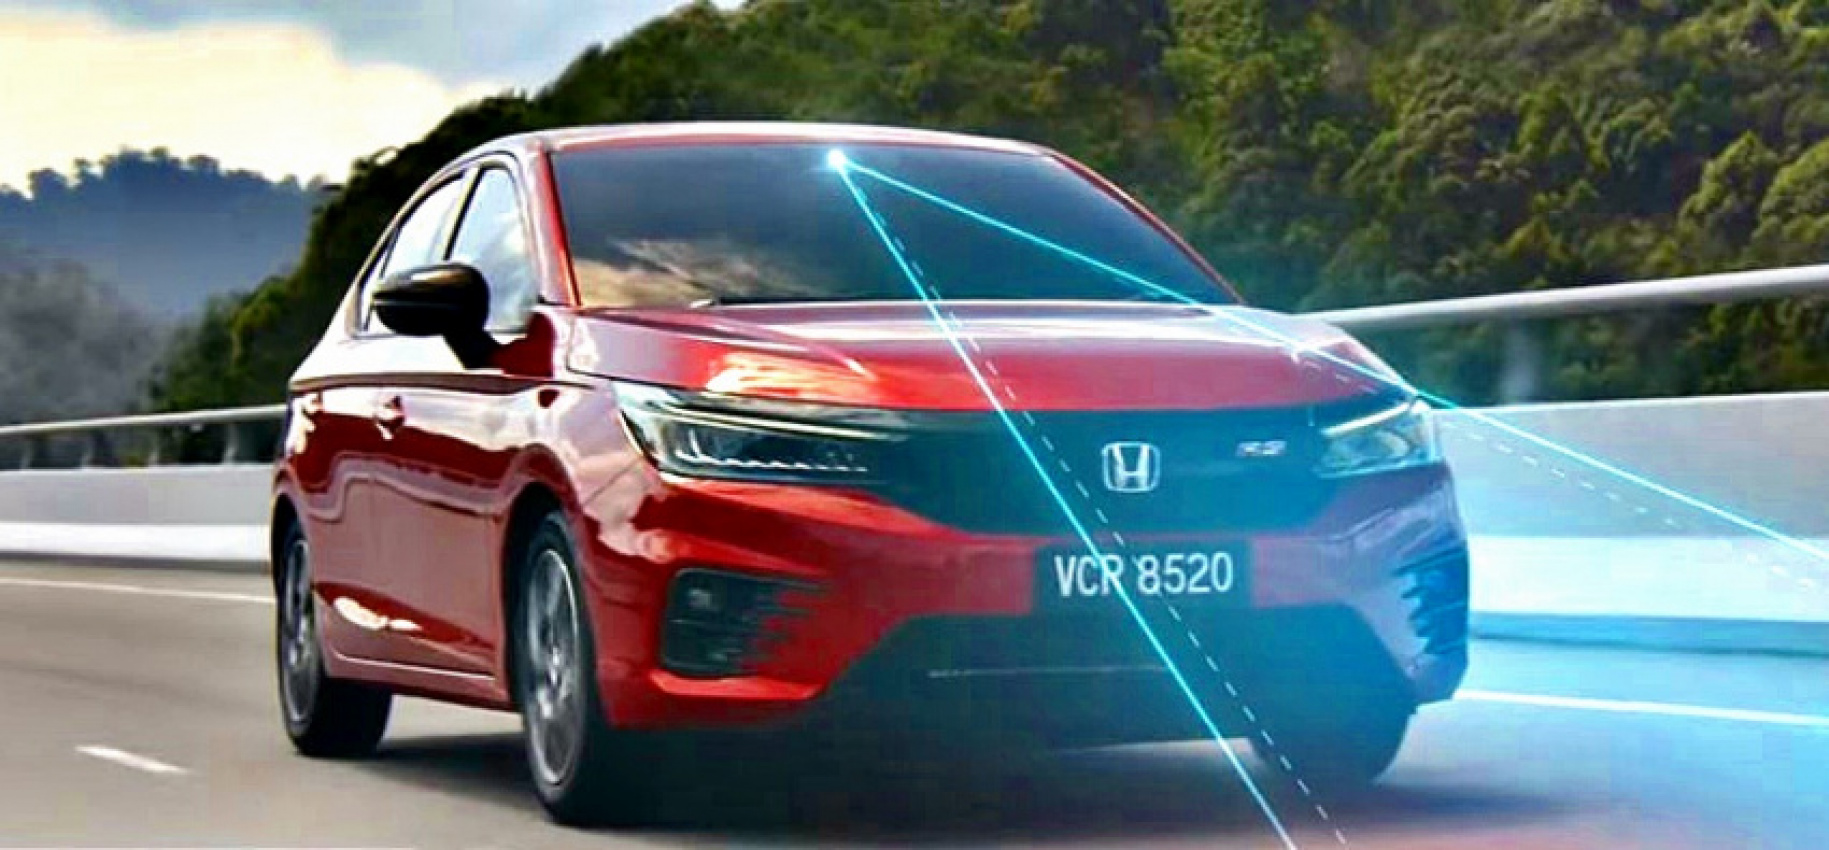 autos, cars, honda, 4-mode ultra seat, hatchback, honda city, honda city hatchback, honda i-mmd, honda lanewatch, honda malaysia, honda sensing, hybrid electric vehicle, highlights of all-new honda city hatchback which you can book now